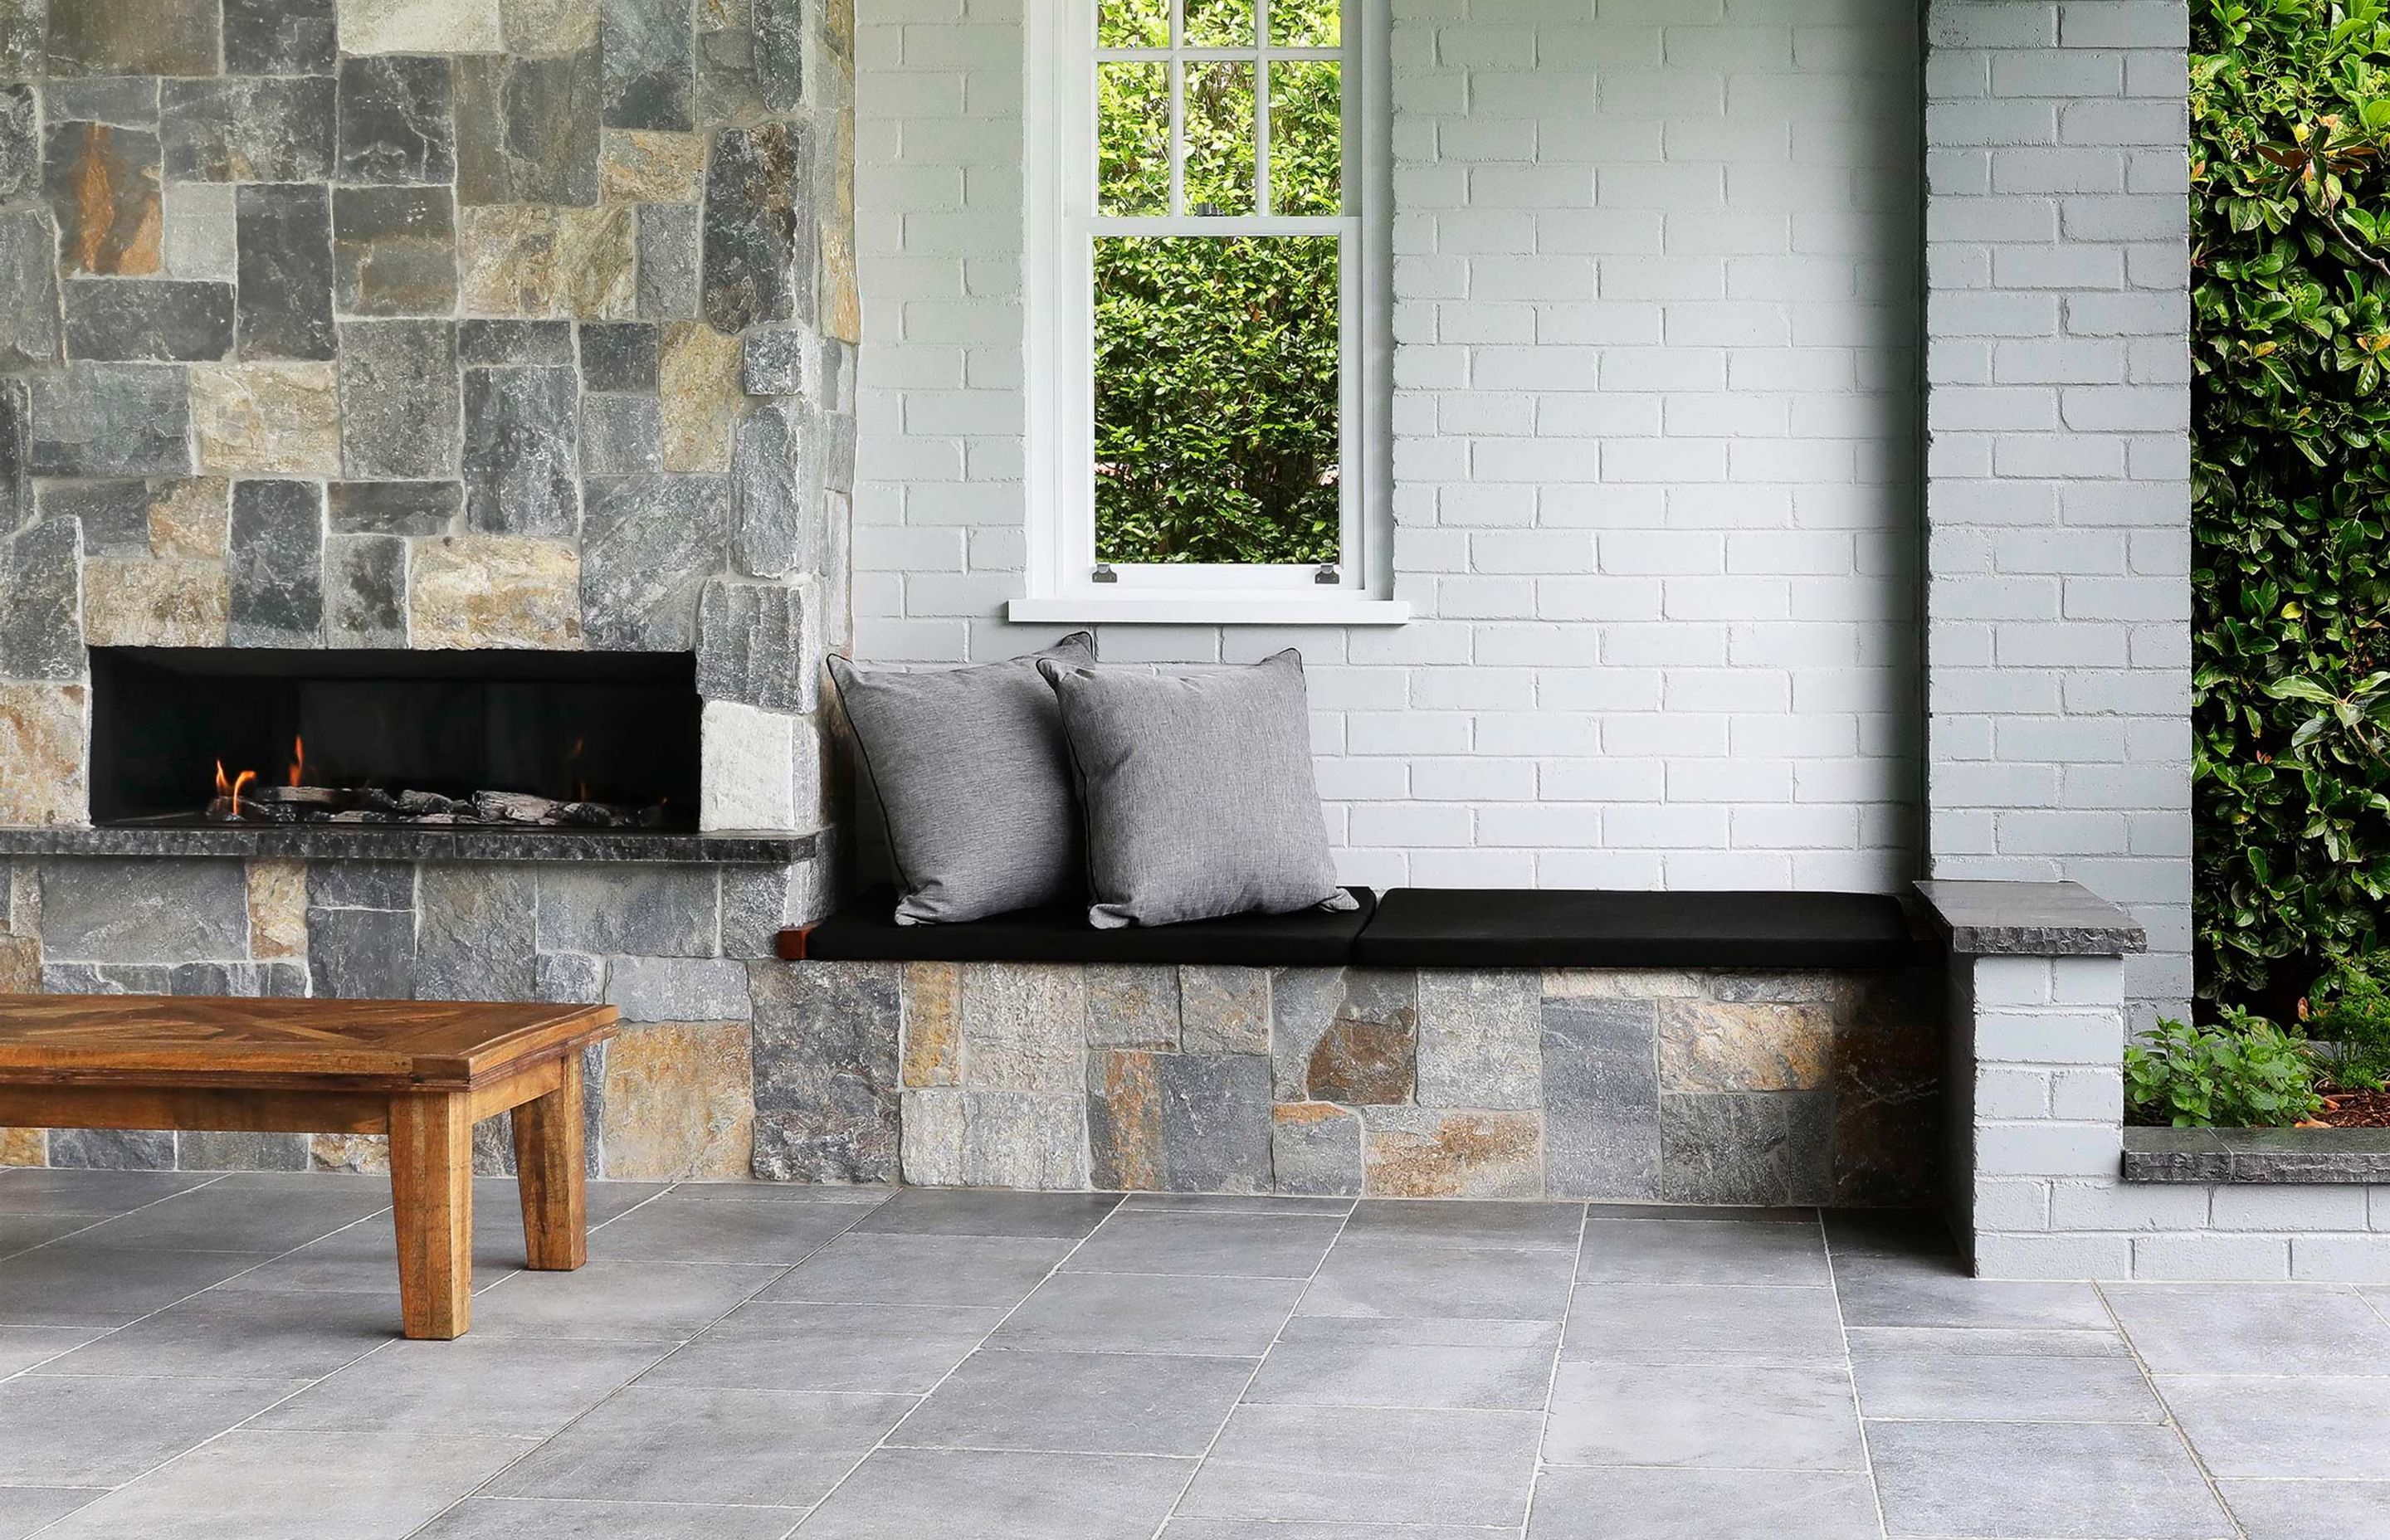 Which Is better flooring? Stone or wood?